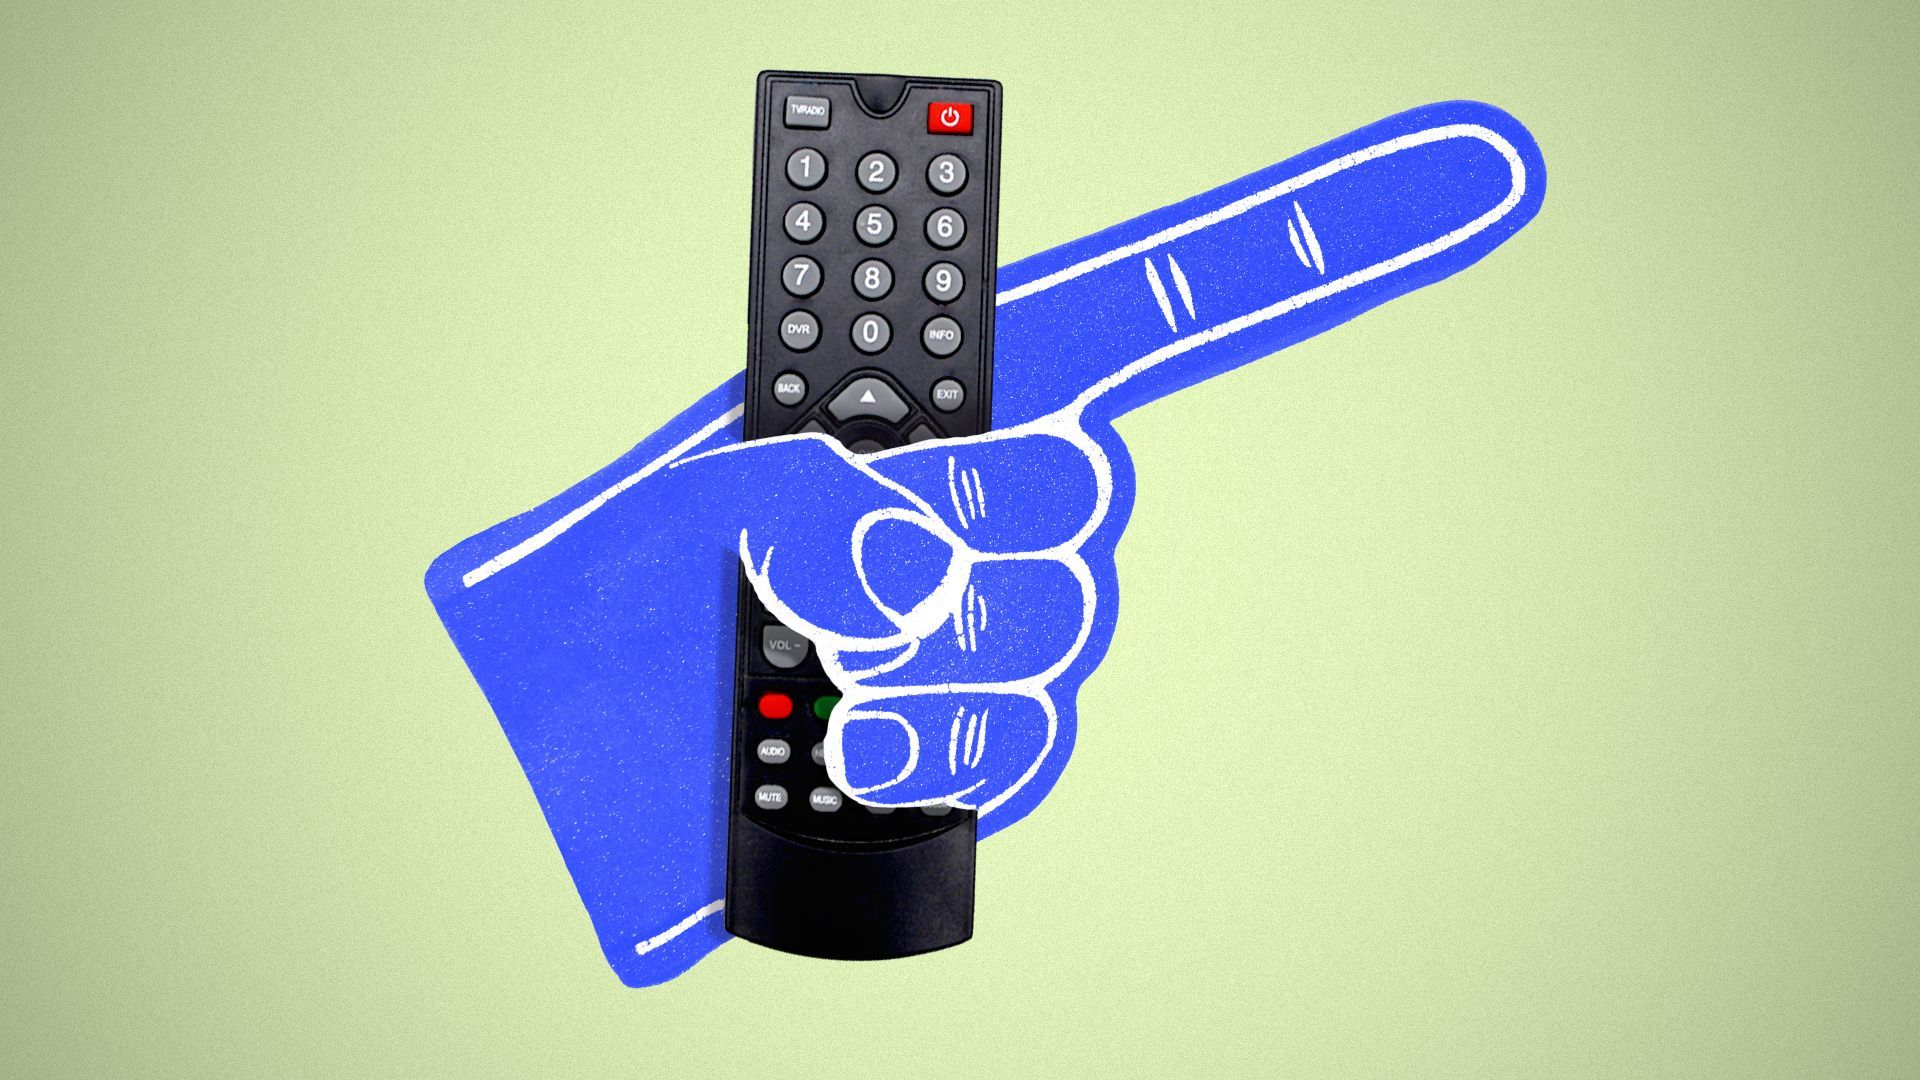 Illustration of a foam hand holding a TV remote.